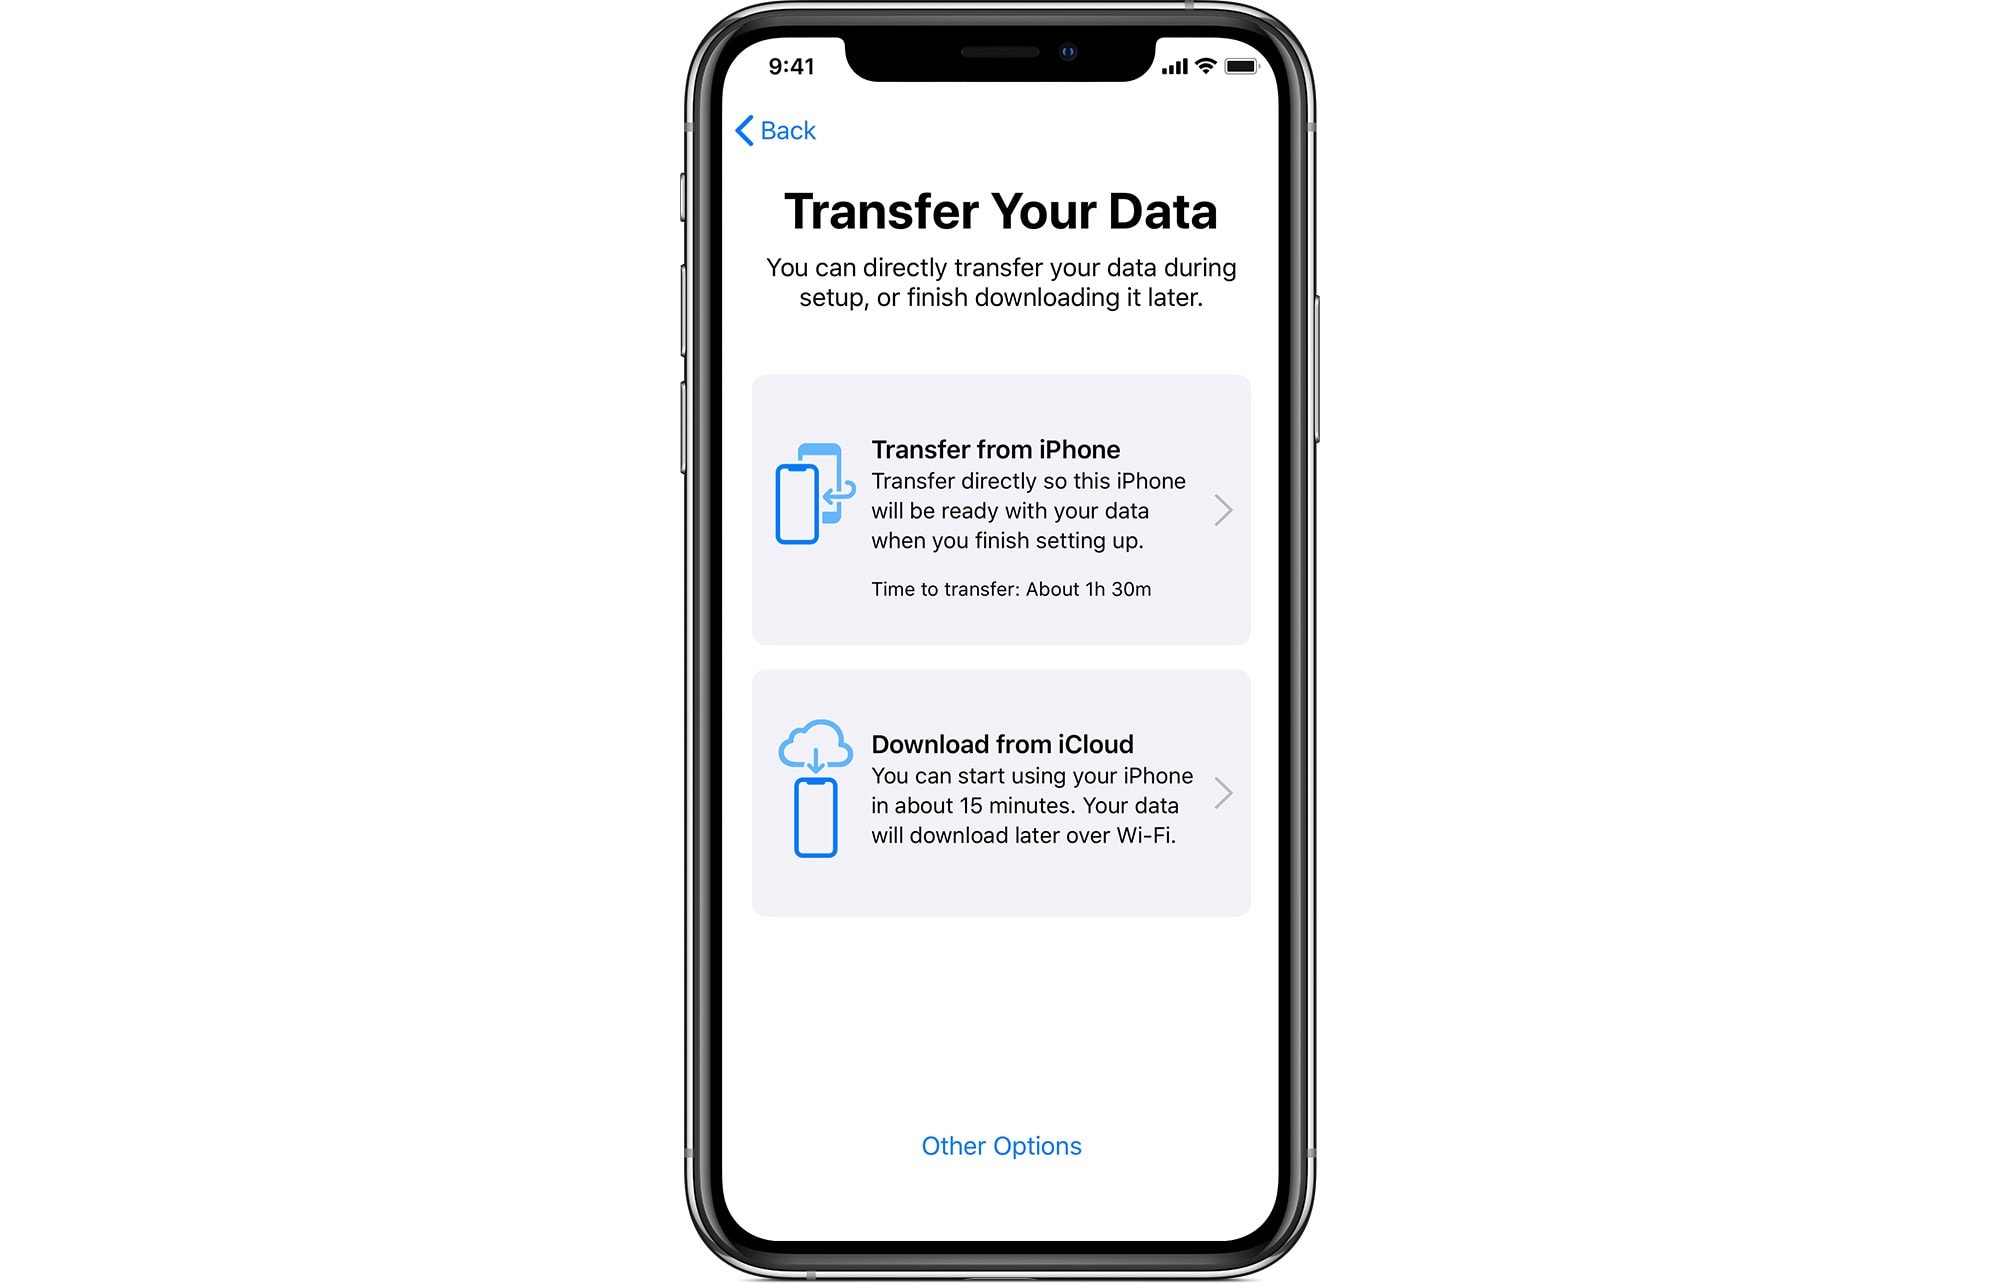 iPhone Migration appears as a new option on the Data Transfer screen.